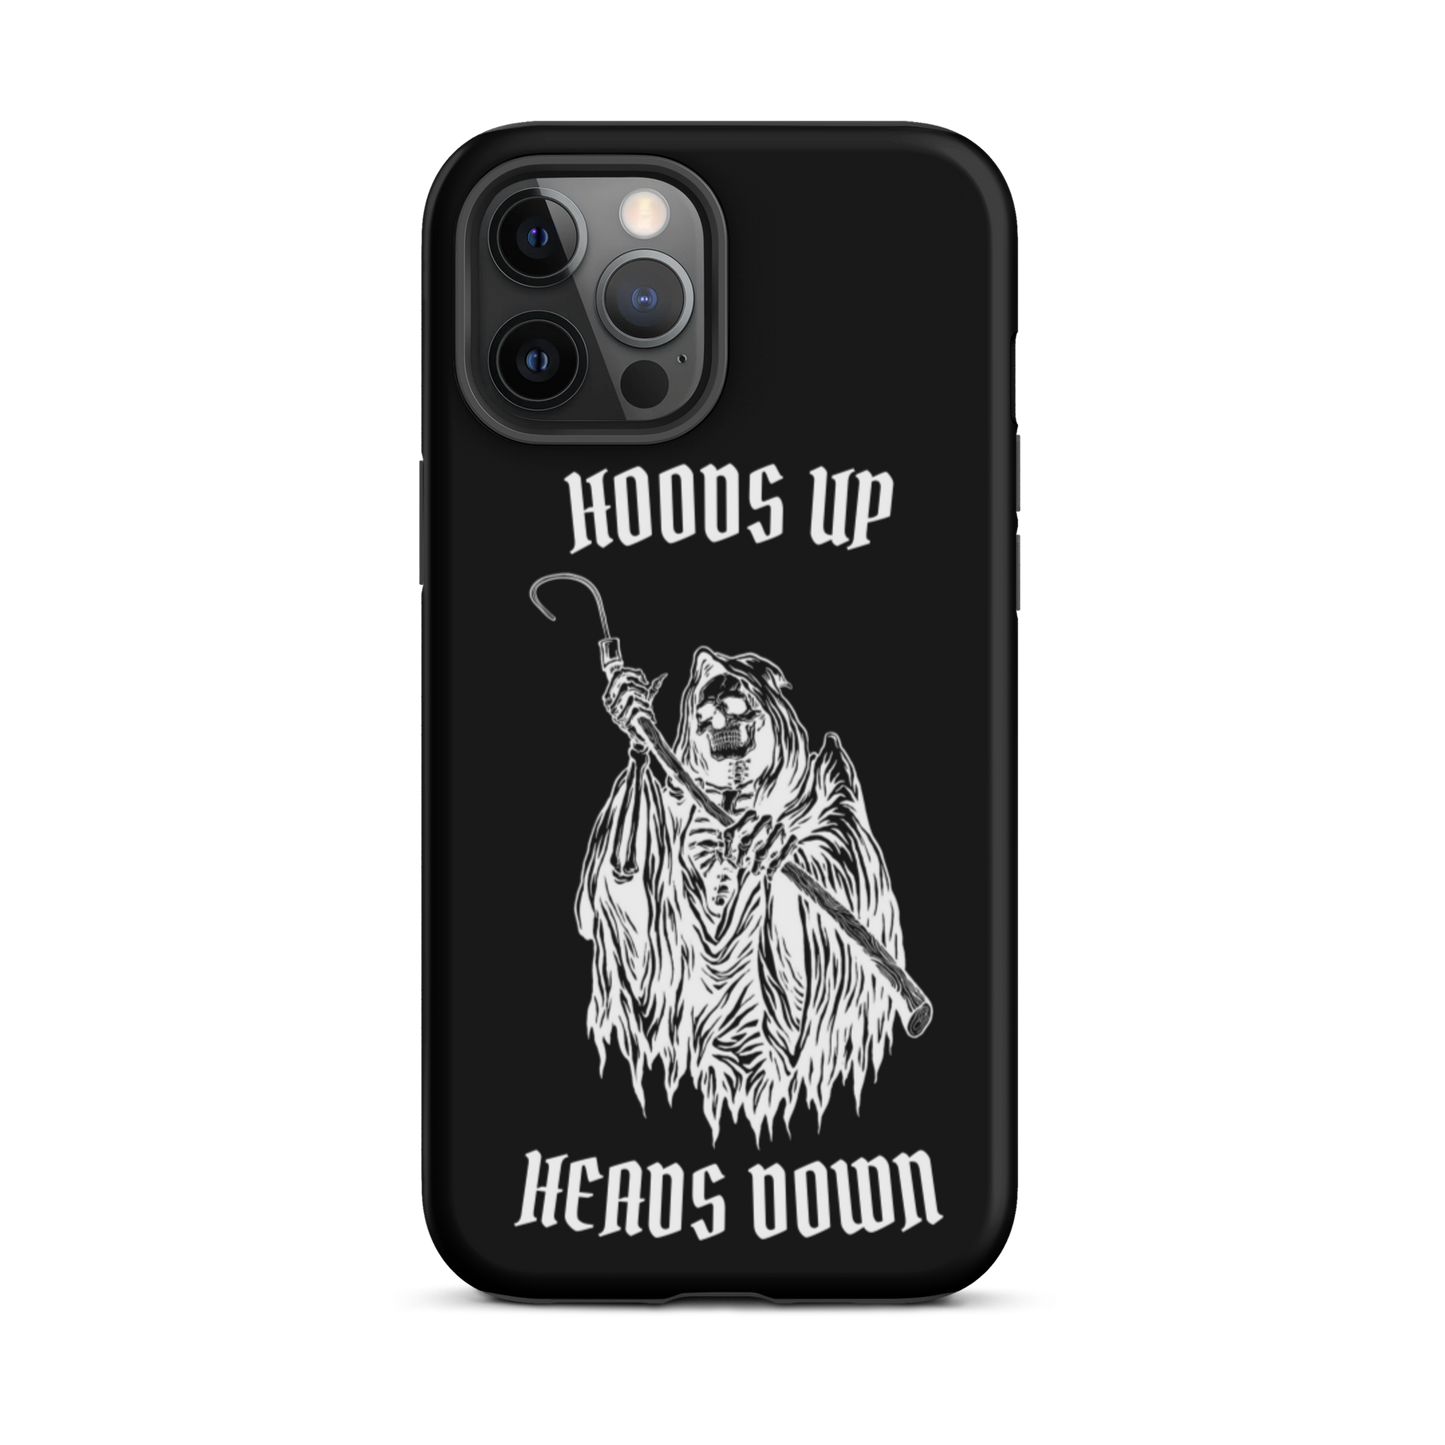 Hoods Up Heads Down Tough iPhone case (Black)